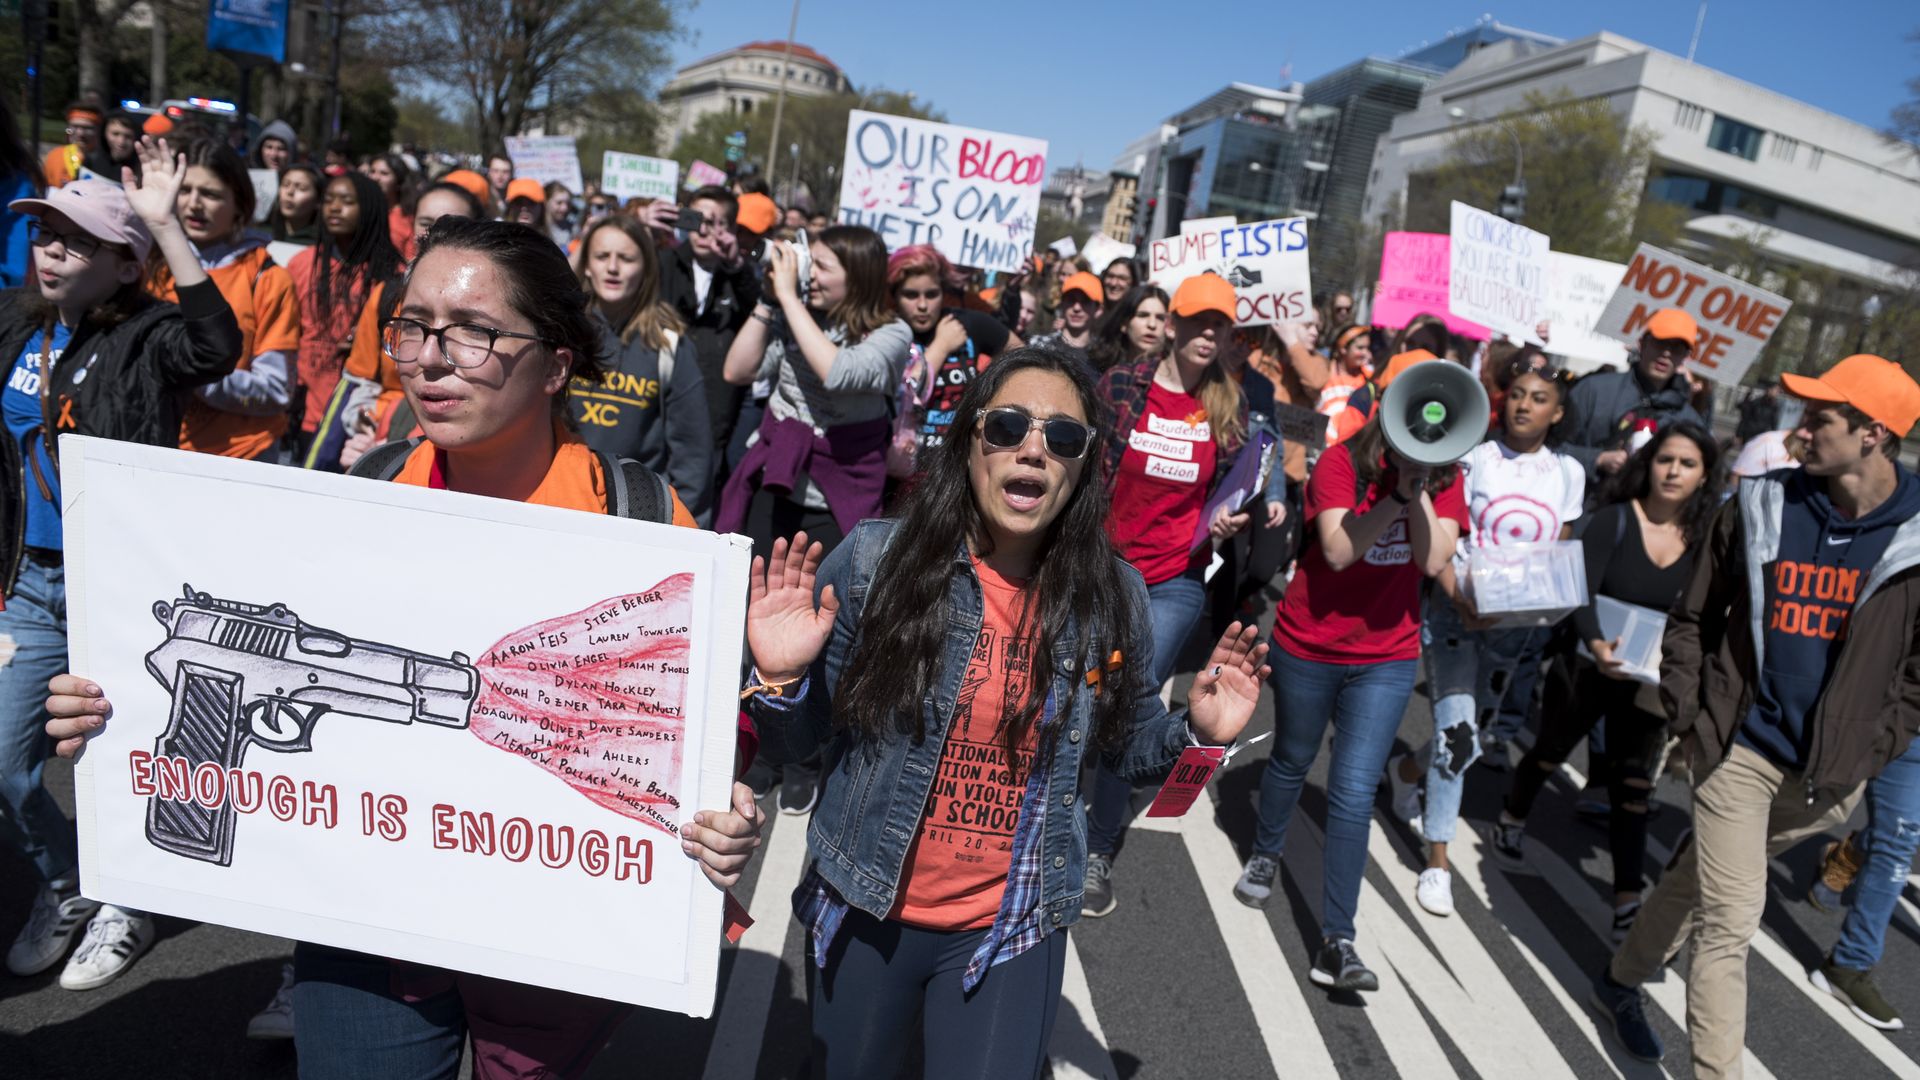 Students walk towards the Capitol in D.C. holding signs reading "Enough is enough" with drawings of a gun.